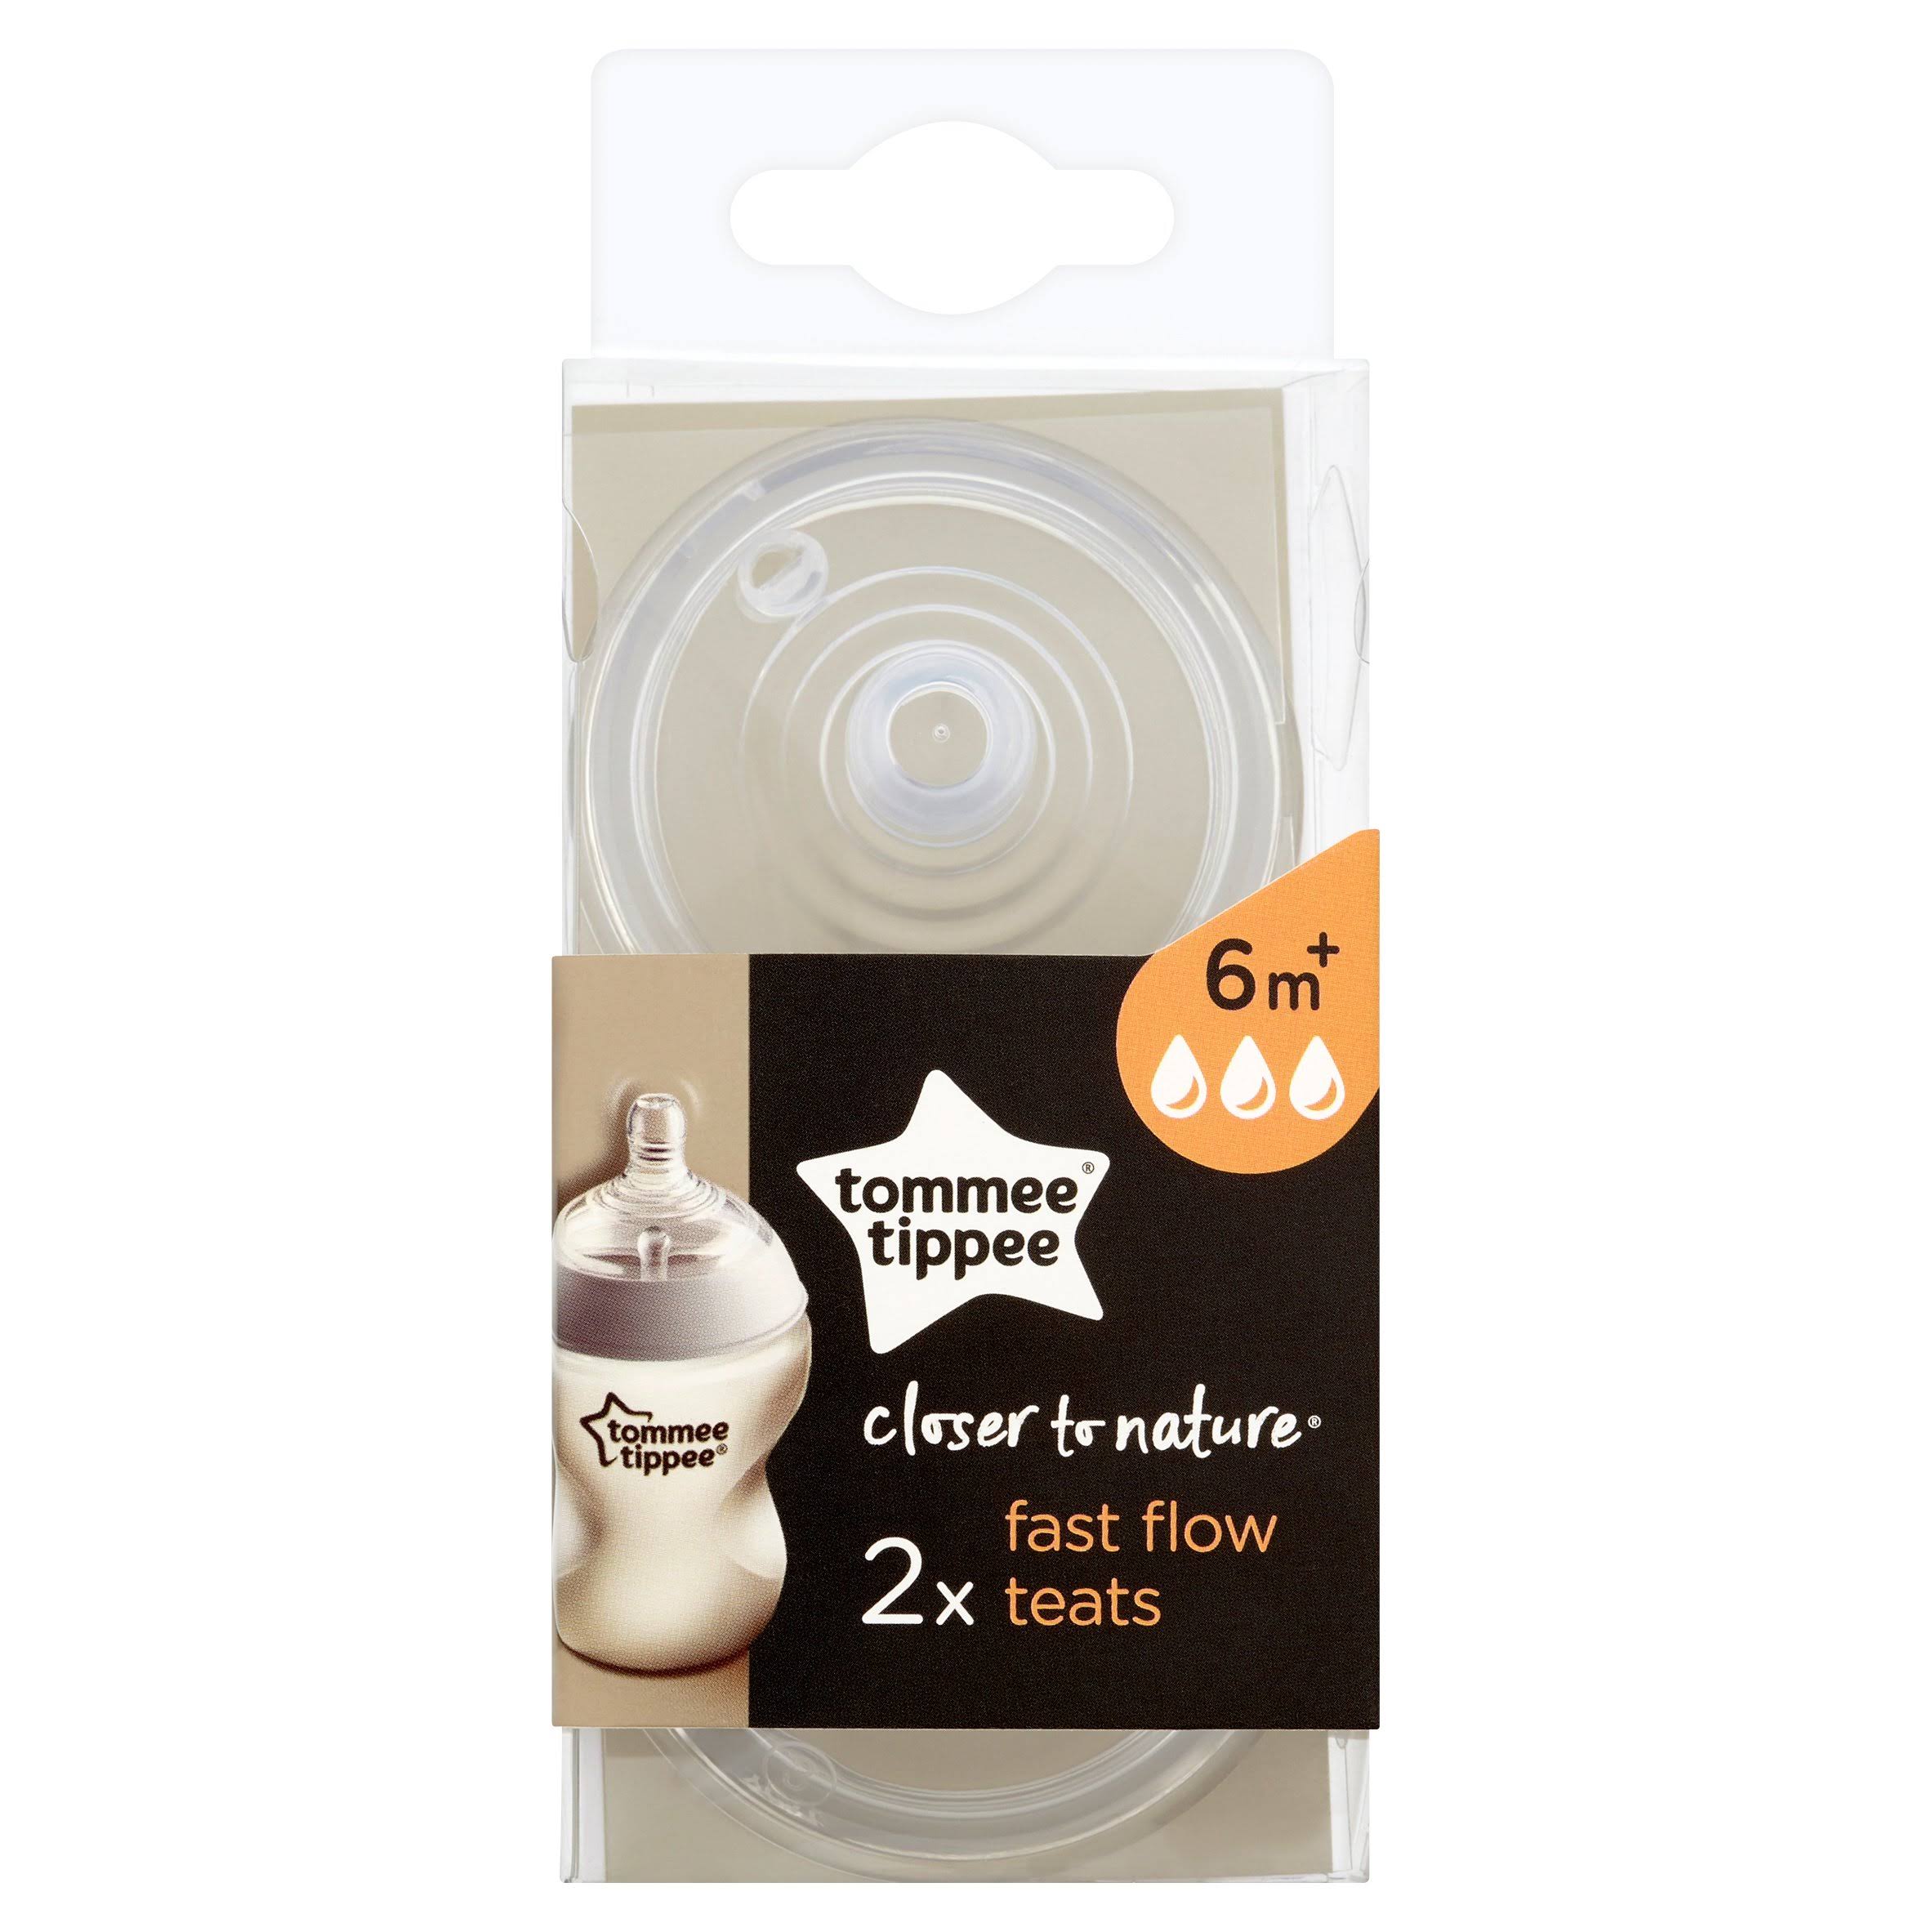 Tommee Tippee Closer to Nature Fast Flow Teats - Clear, 6 Months +, 2pk